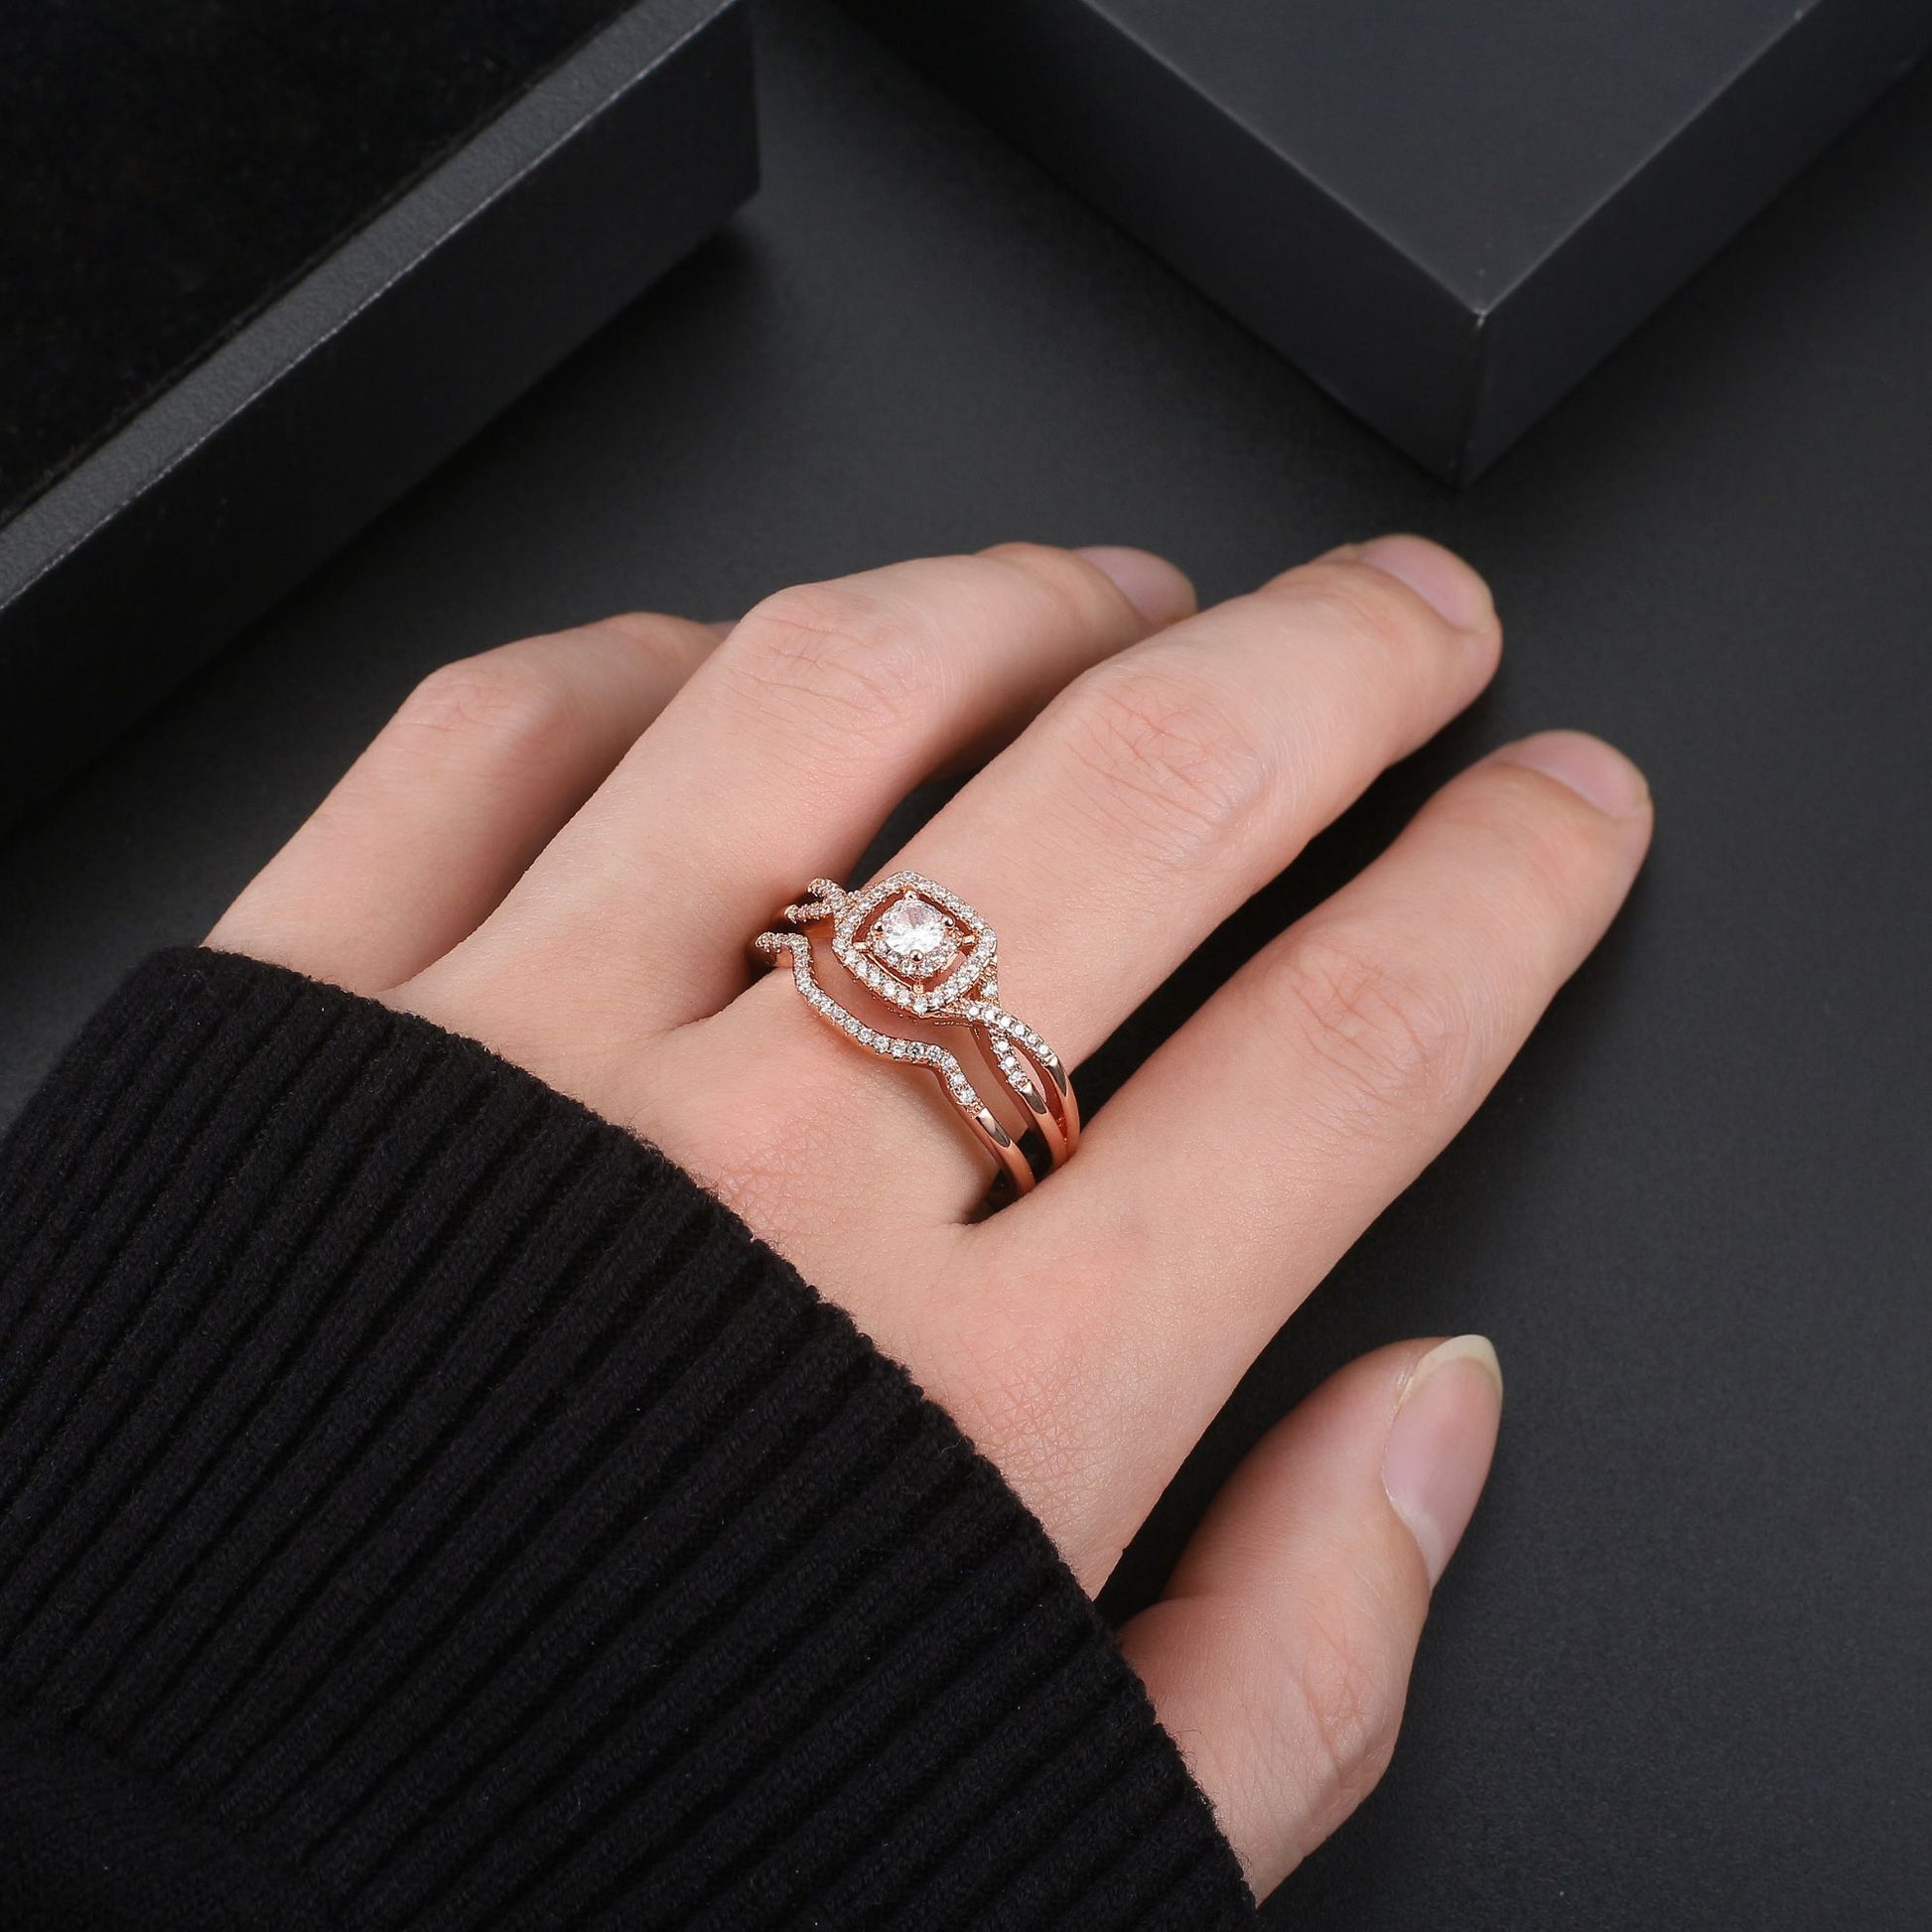 Sterling Silver Wedding Ring Set for Women Halo CZ Rose Gold Engagement Ring Ginger Lyne Collection